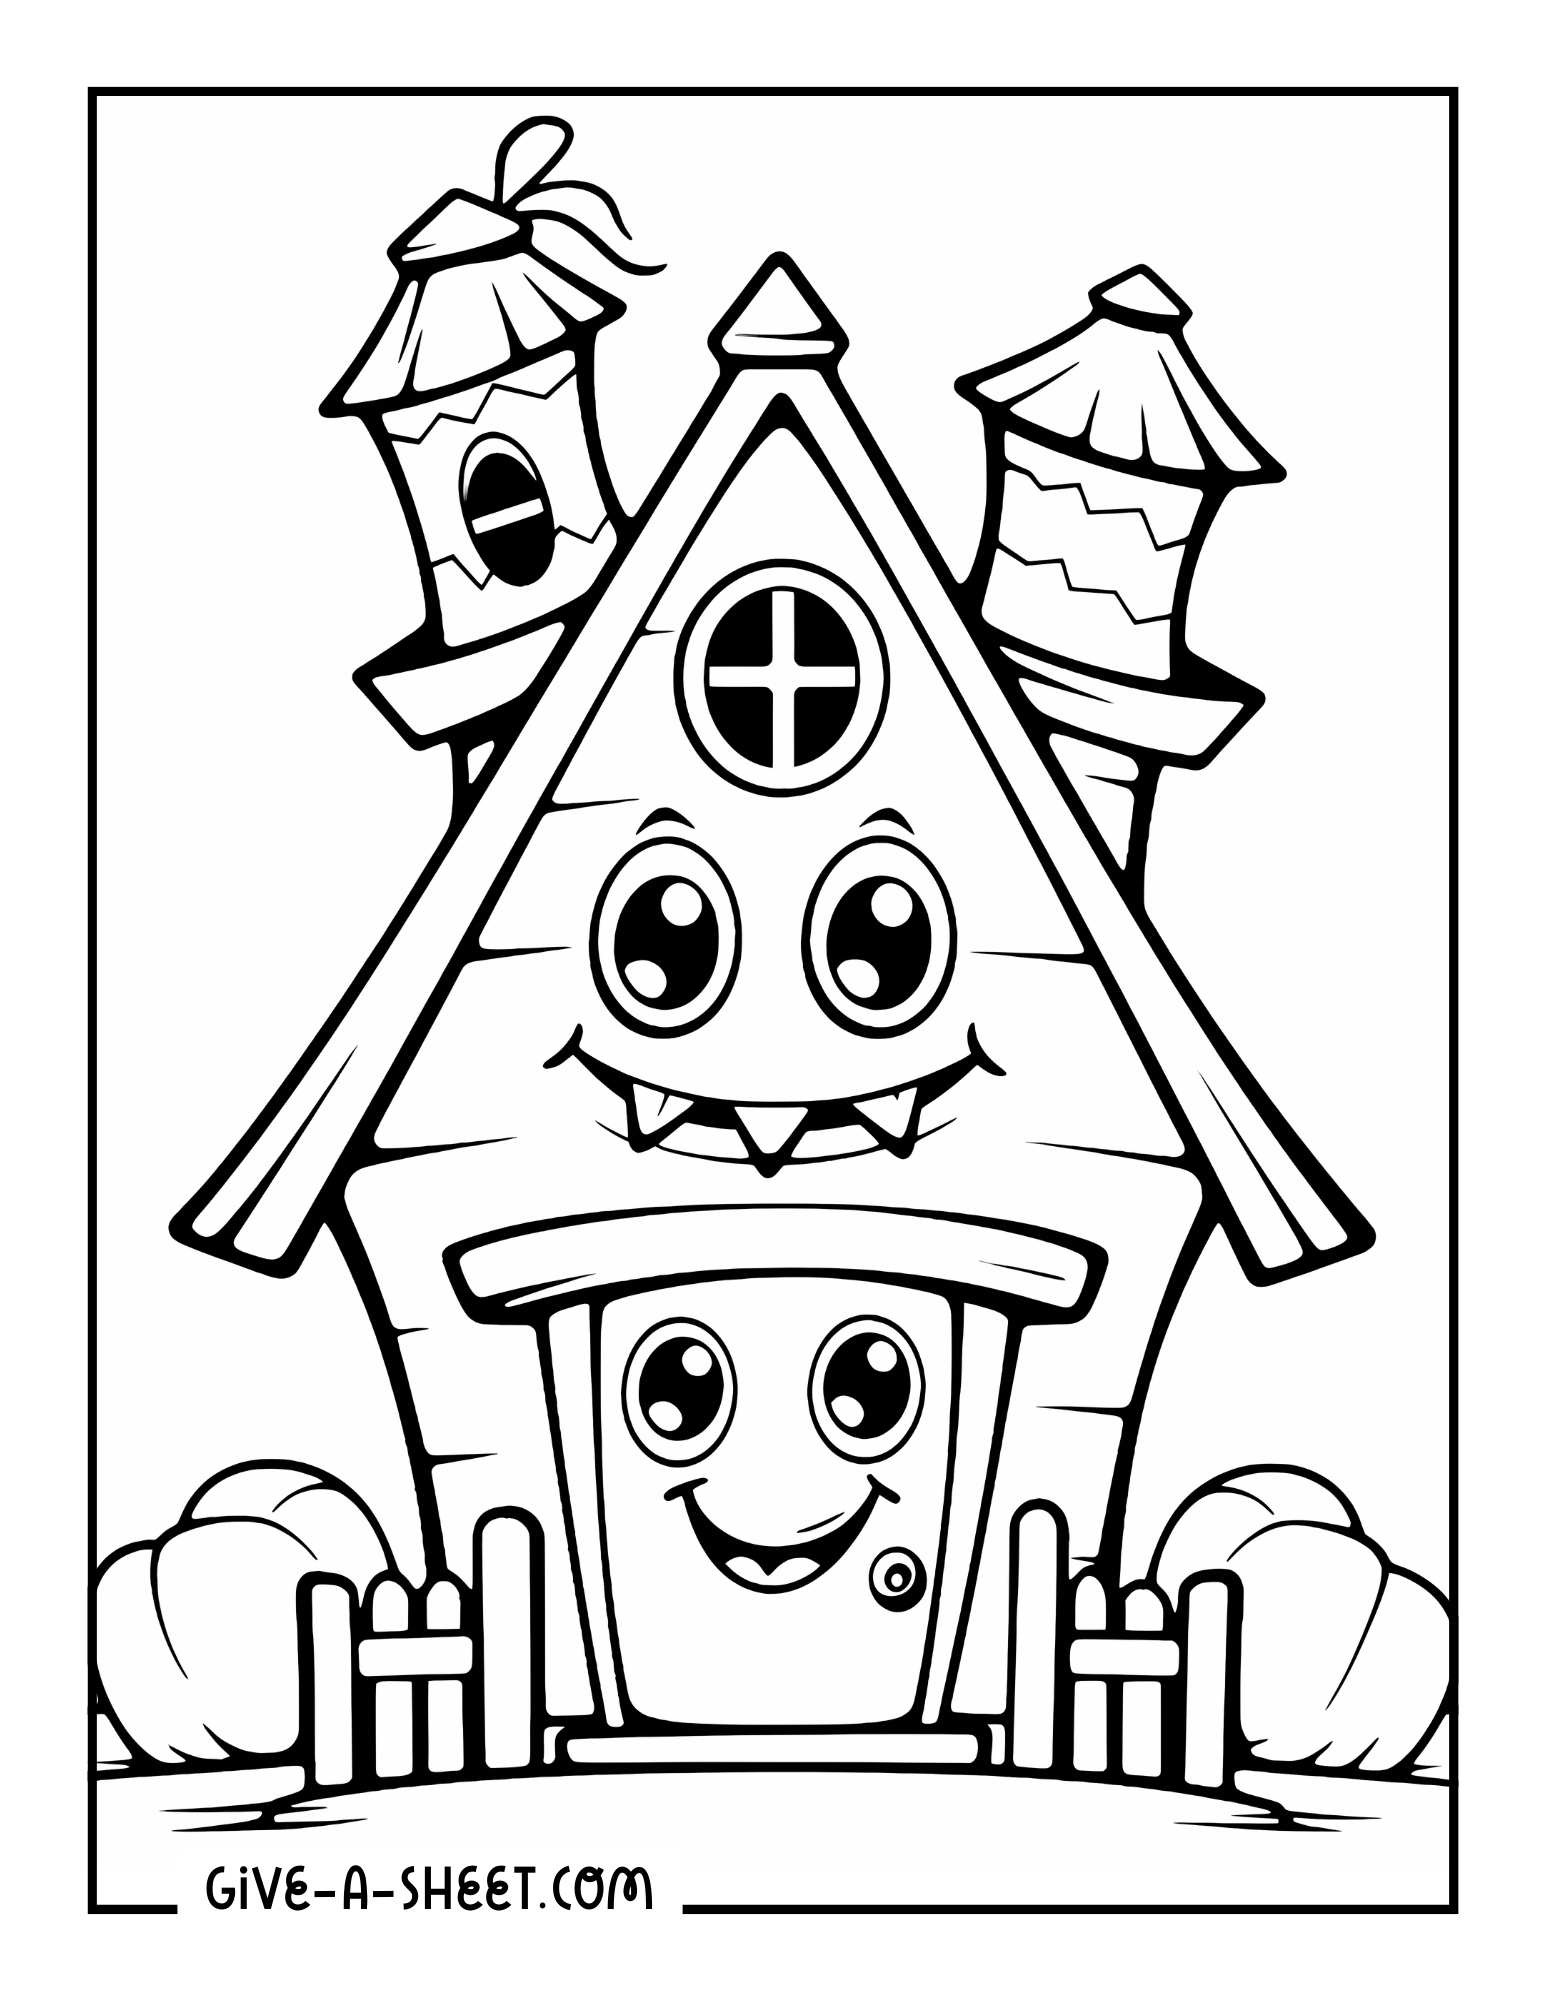 Spooky house with faces coloring page for younger kids.